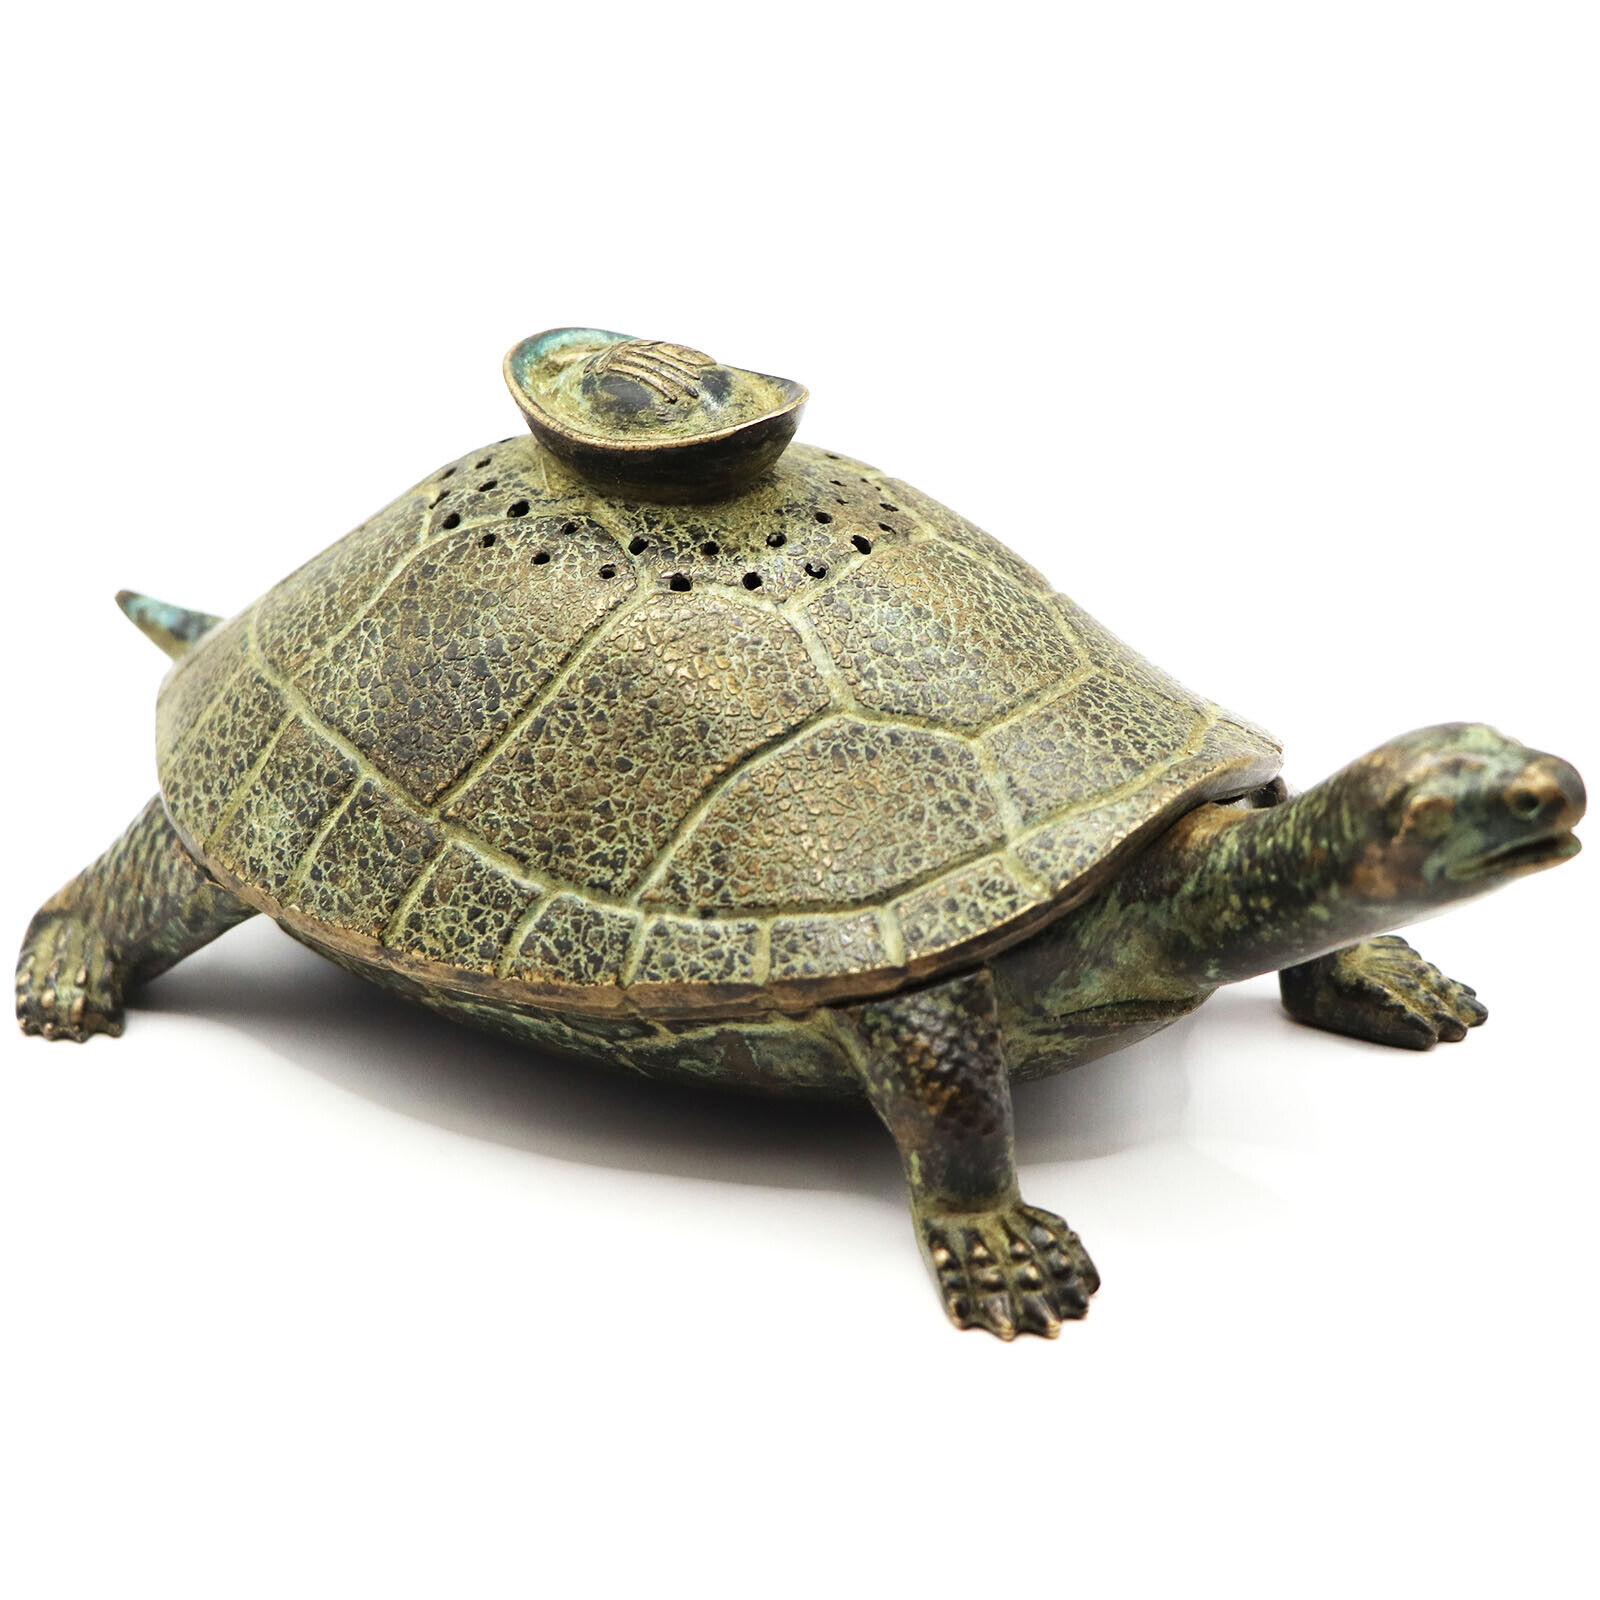 Old Chinese Bronze Longlife Tortoises Incense Burner Censer Collect “福如东海，寿比南山”